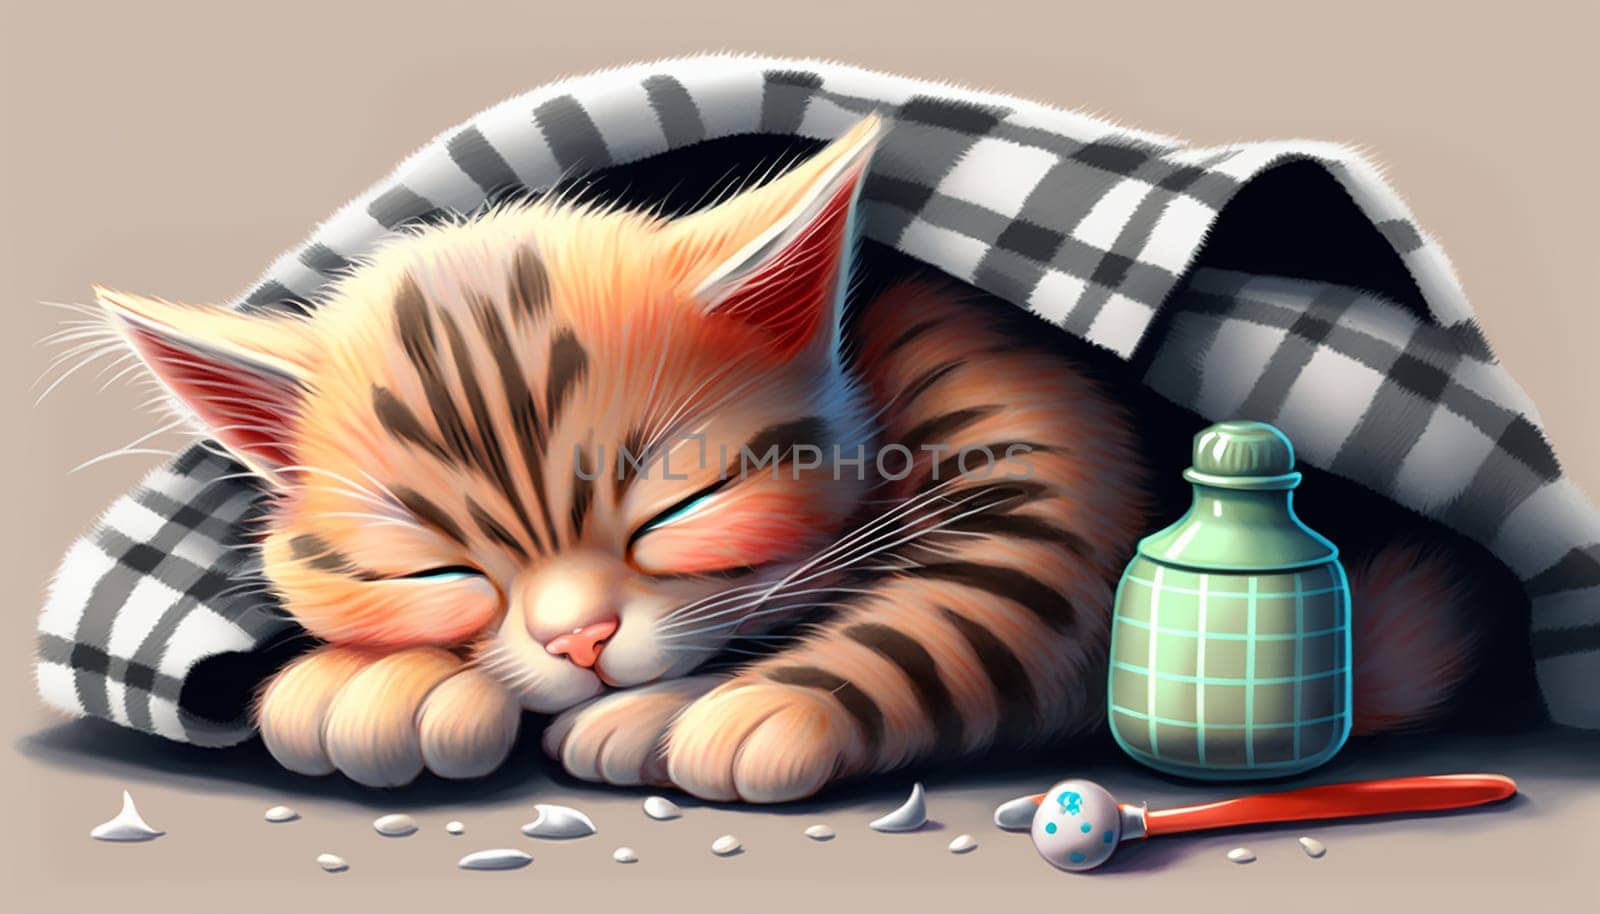 gray kitten sleeping on gray plaid wool blanket with tassels, embracing soft beige knitted toy. High quality photo